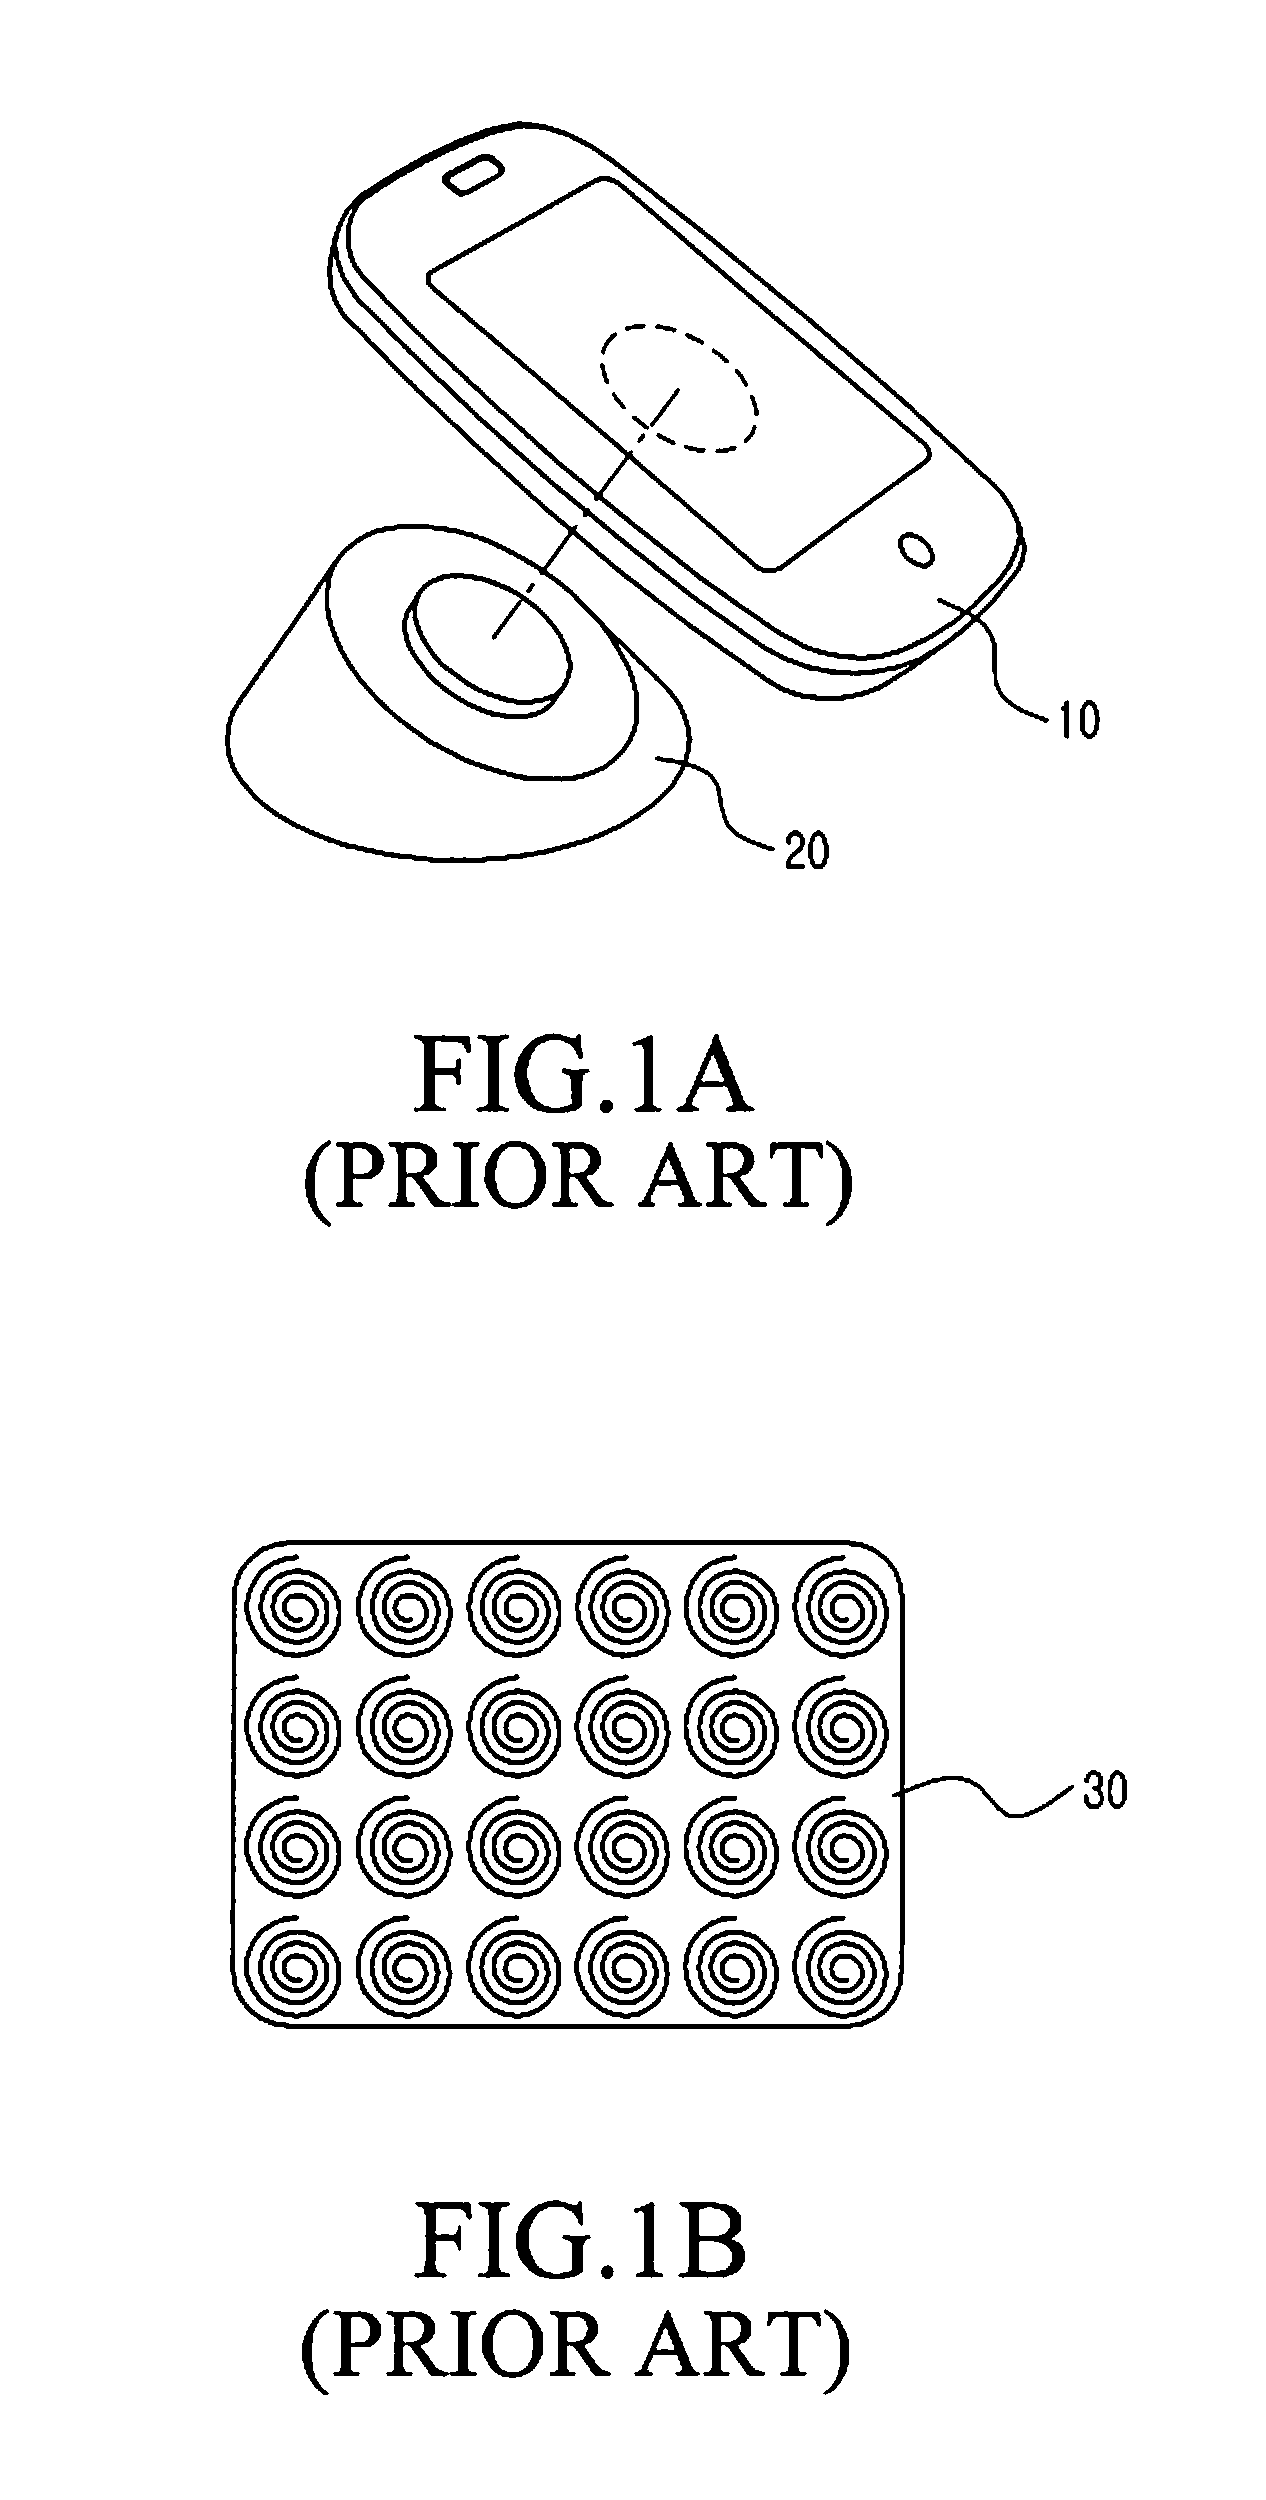 Wireless charger for charging control and charging control method therefor